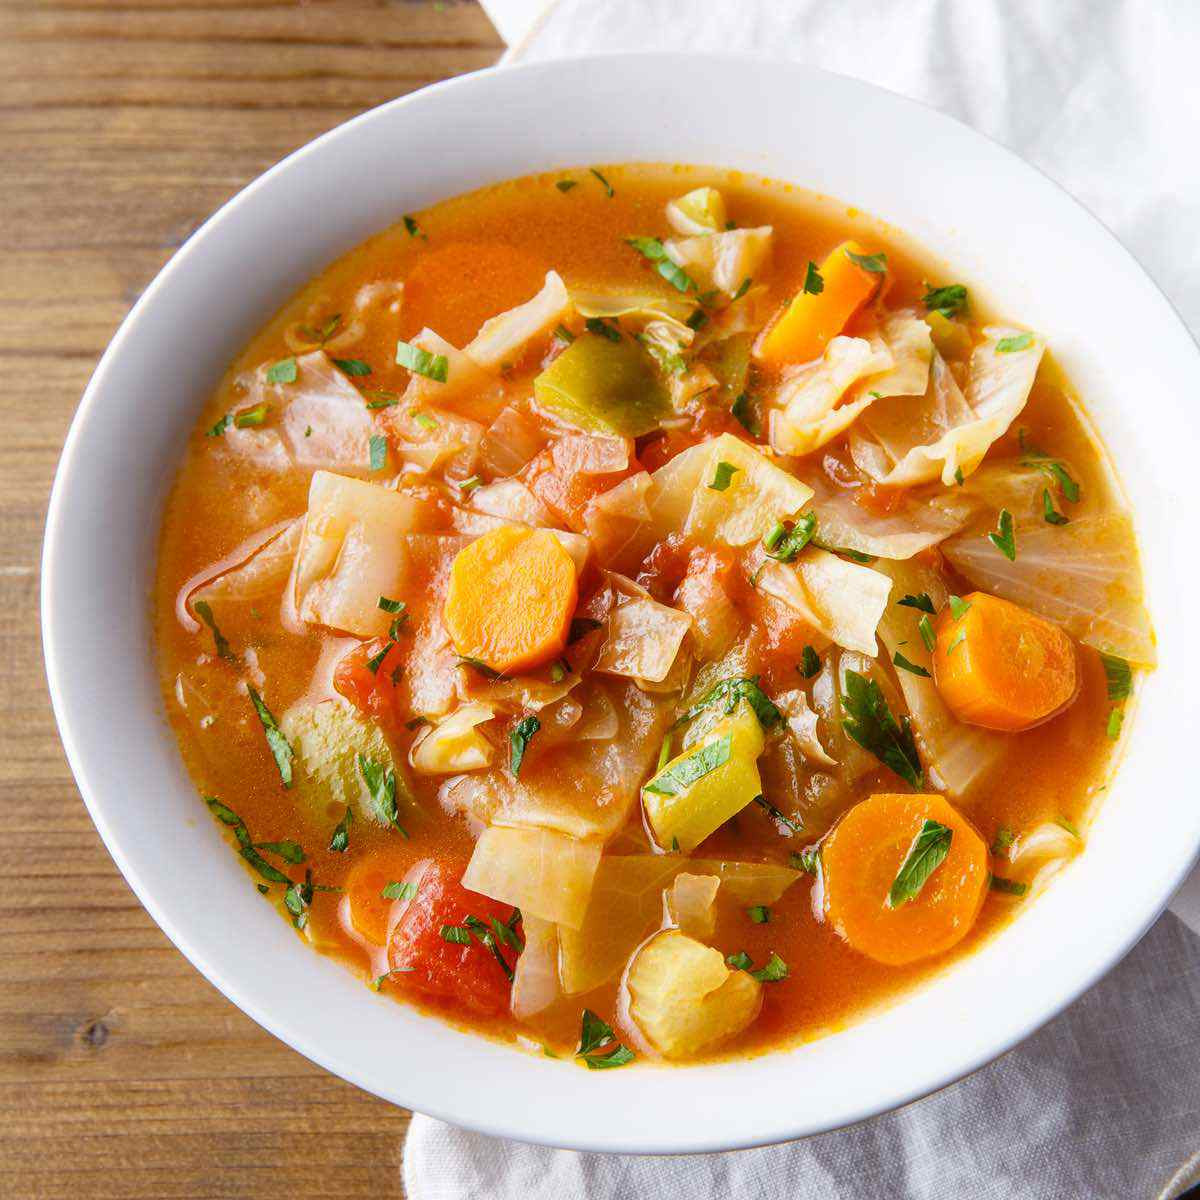 Healthy Canned Soups For Weight Loss
 Cabbage Weight Loss Soup Cozy forting and Nutritious